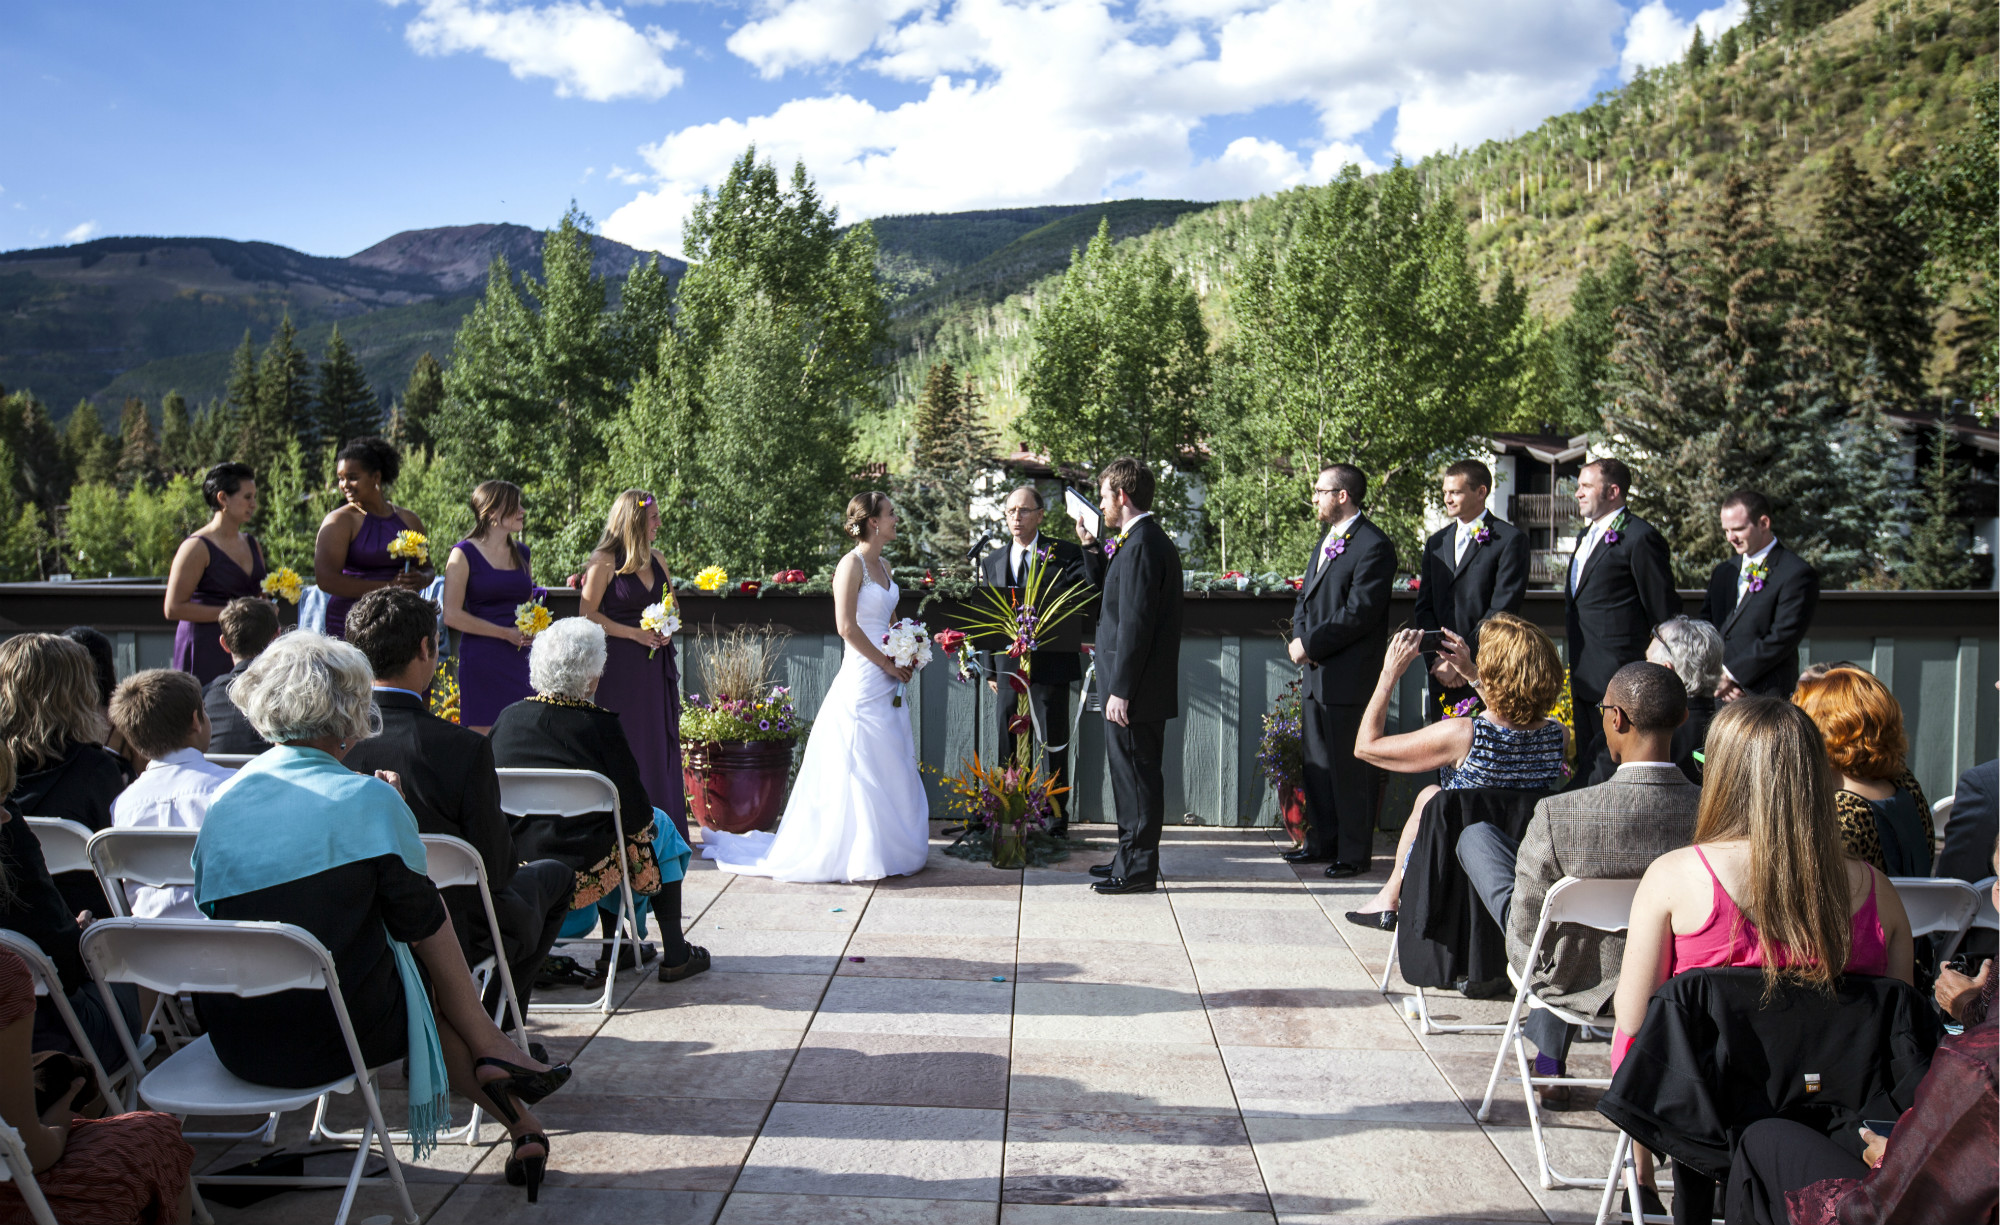 Couple getting married with mountain view